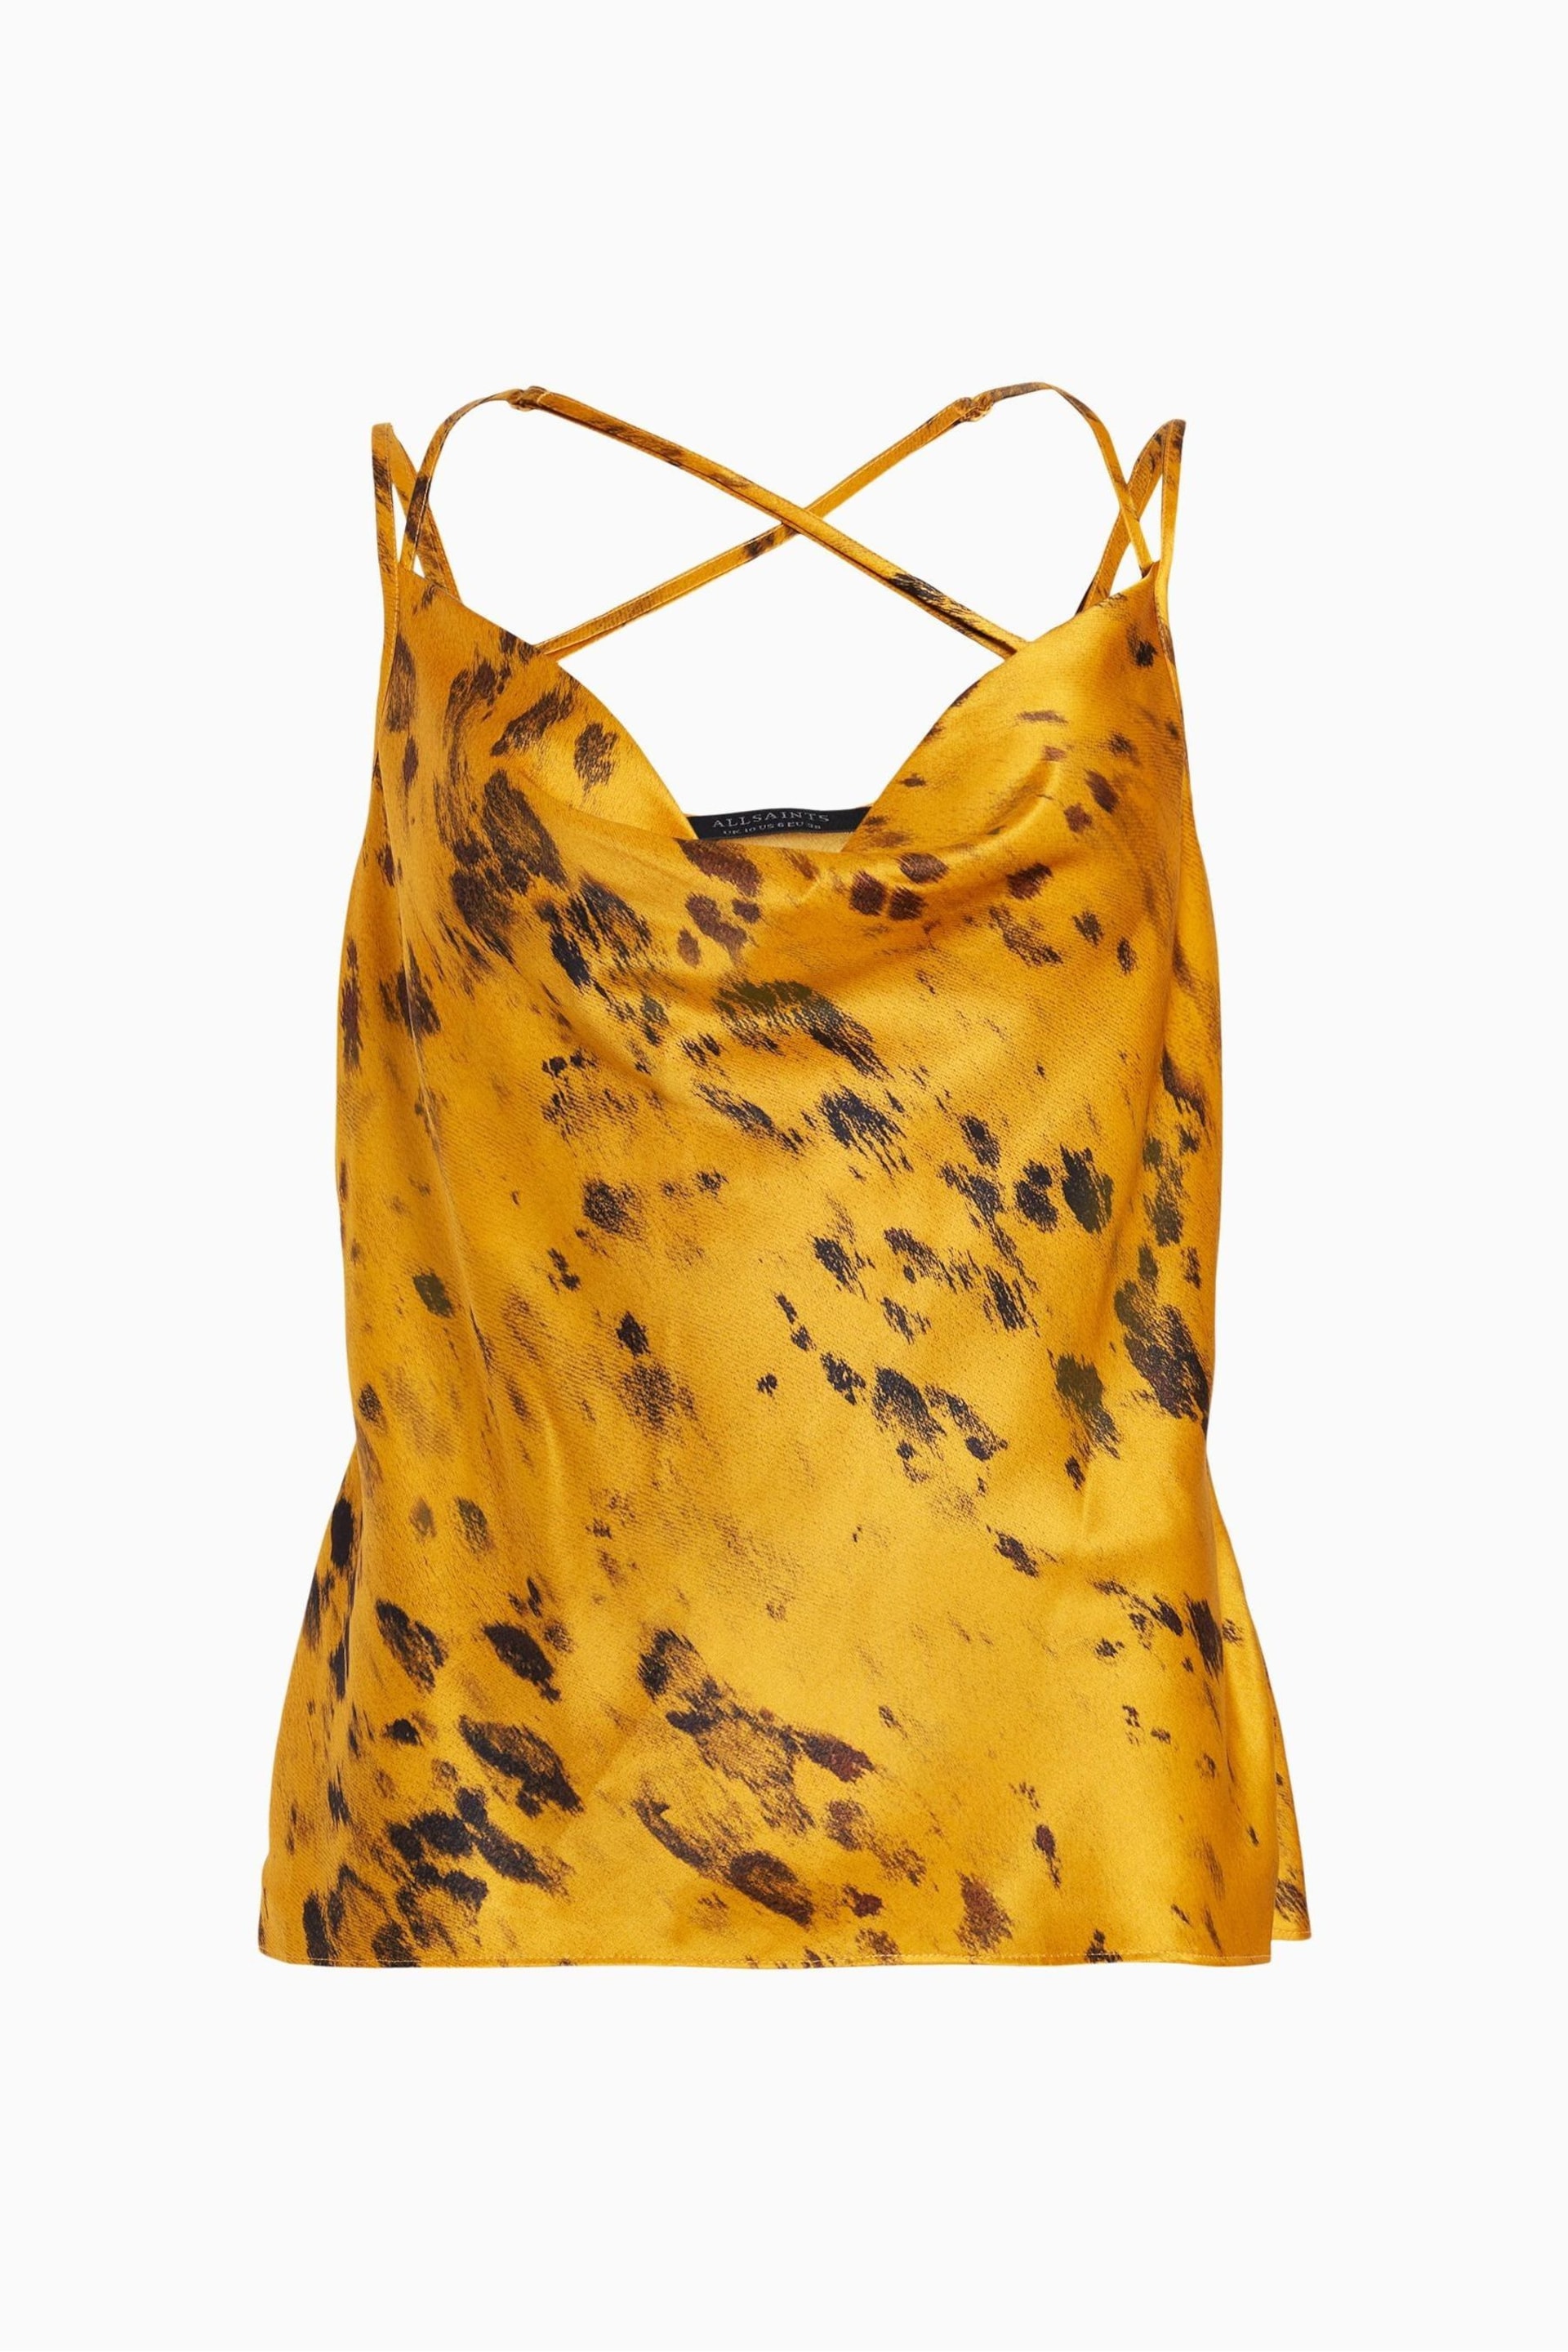 AllSaints Yellow Marta Ronnie Top - Image 6 of 6